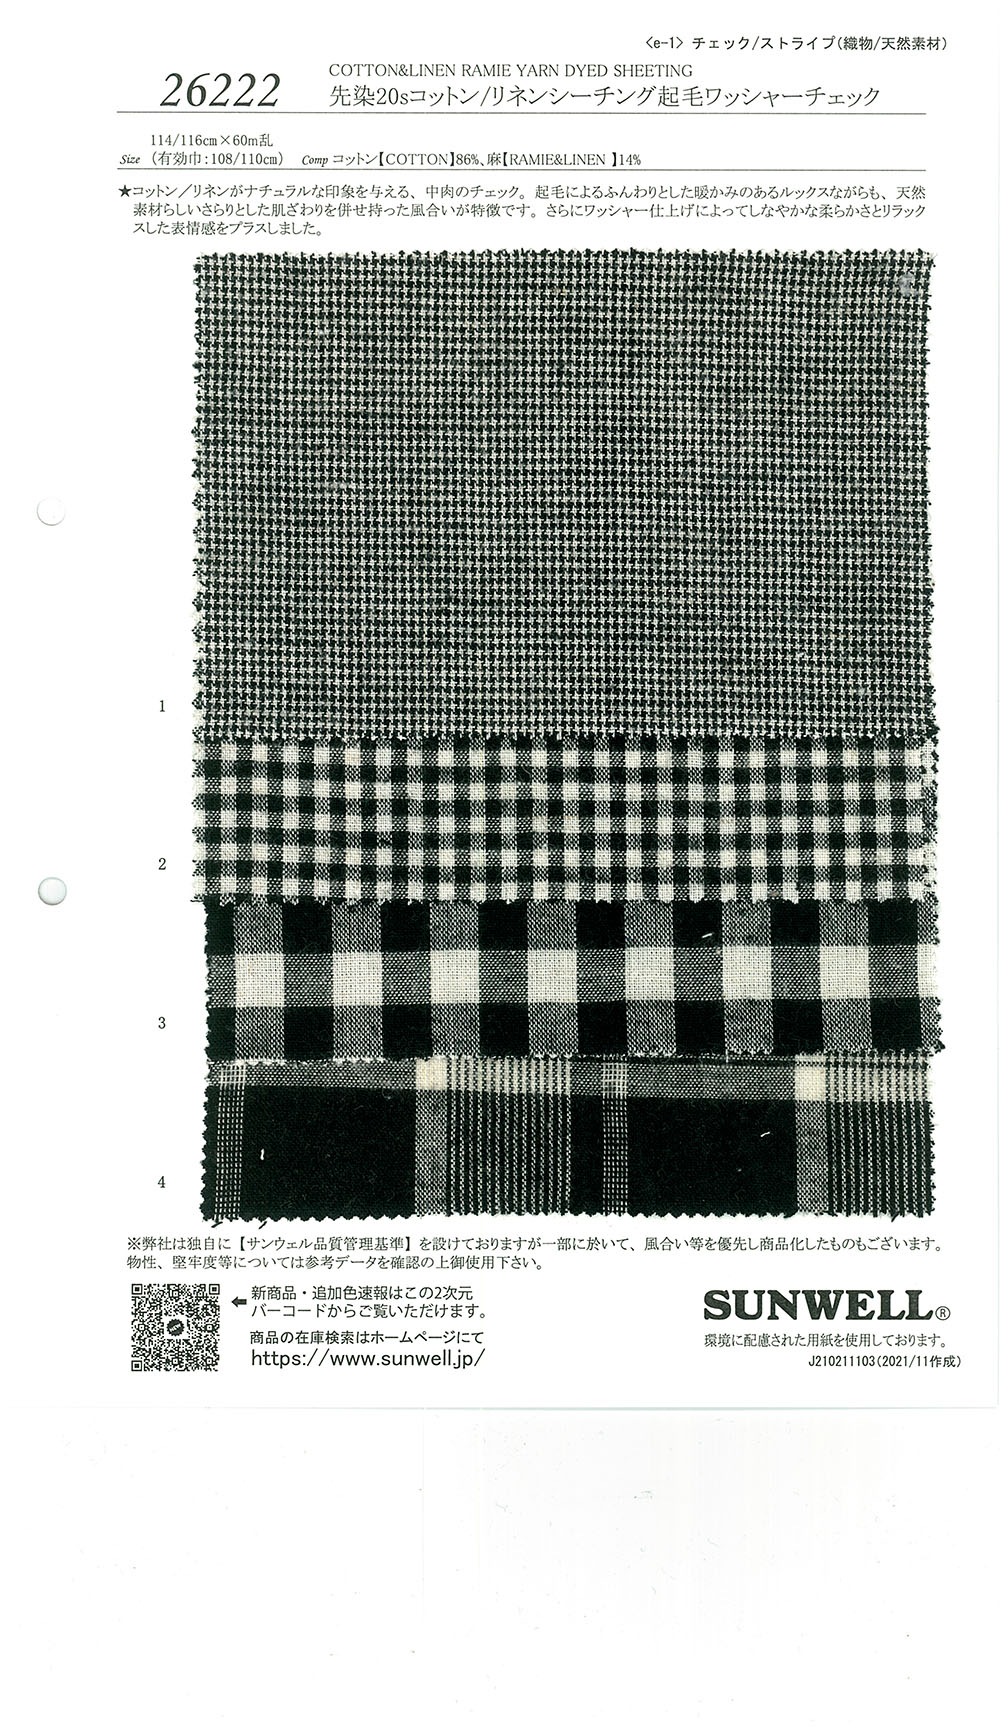 26222 Yarn-dyed 20 Single Thread Cotton/linen Loomstate Fuzzy Washer Processing Check[Textile / Fabric] SUNWELL